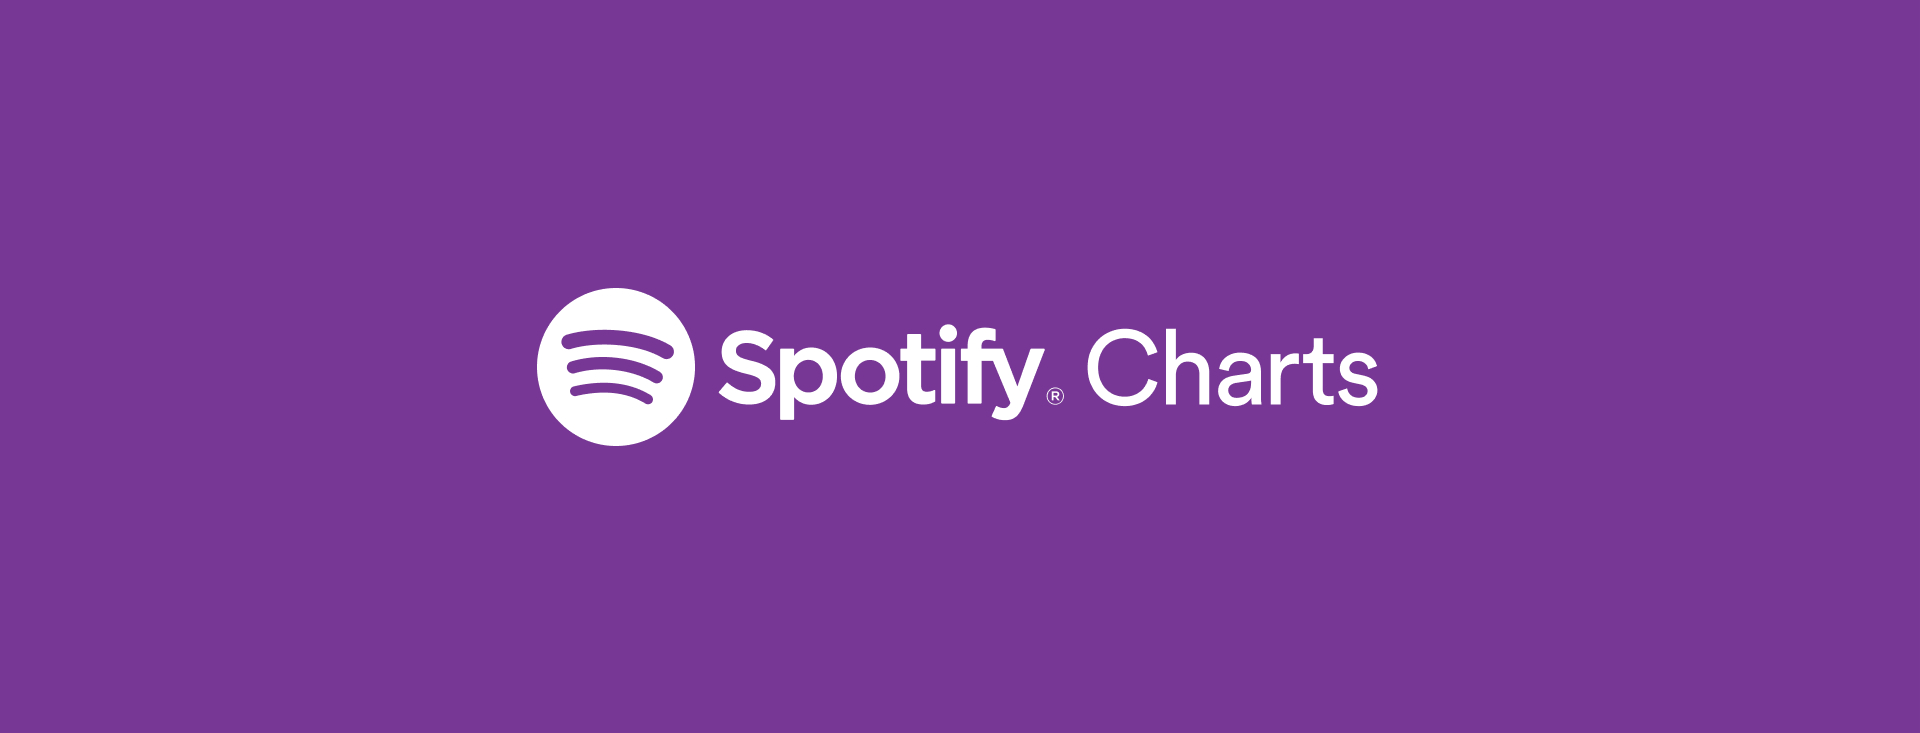 Spotify gets serious about its charts, launching weekly Top 50 lists for  Albums and Songs - Music Business Worldwide